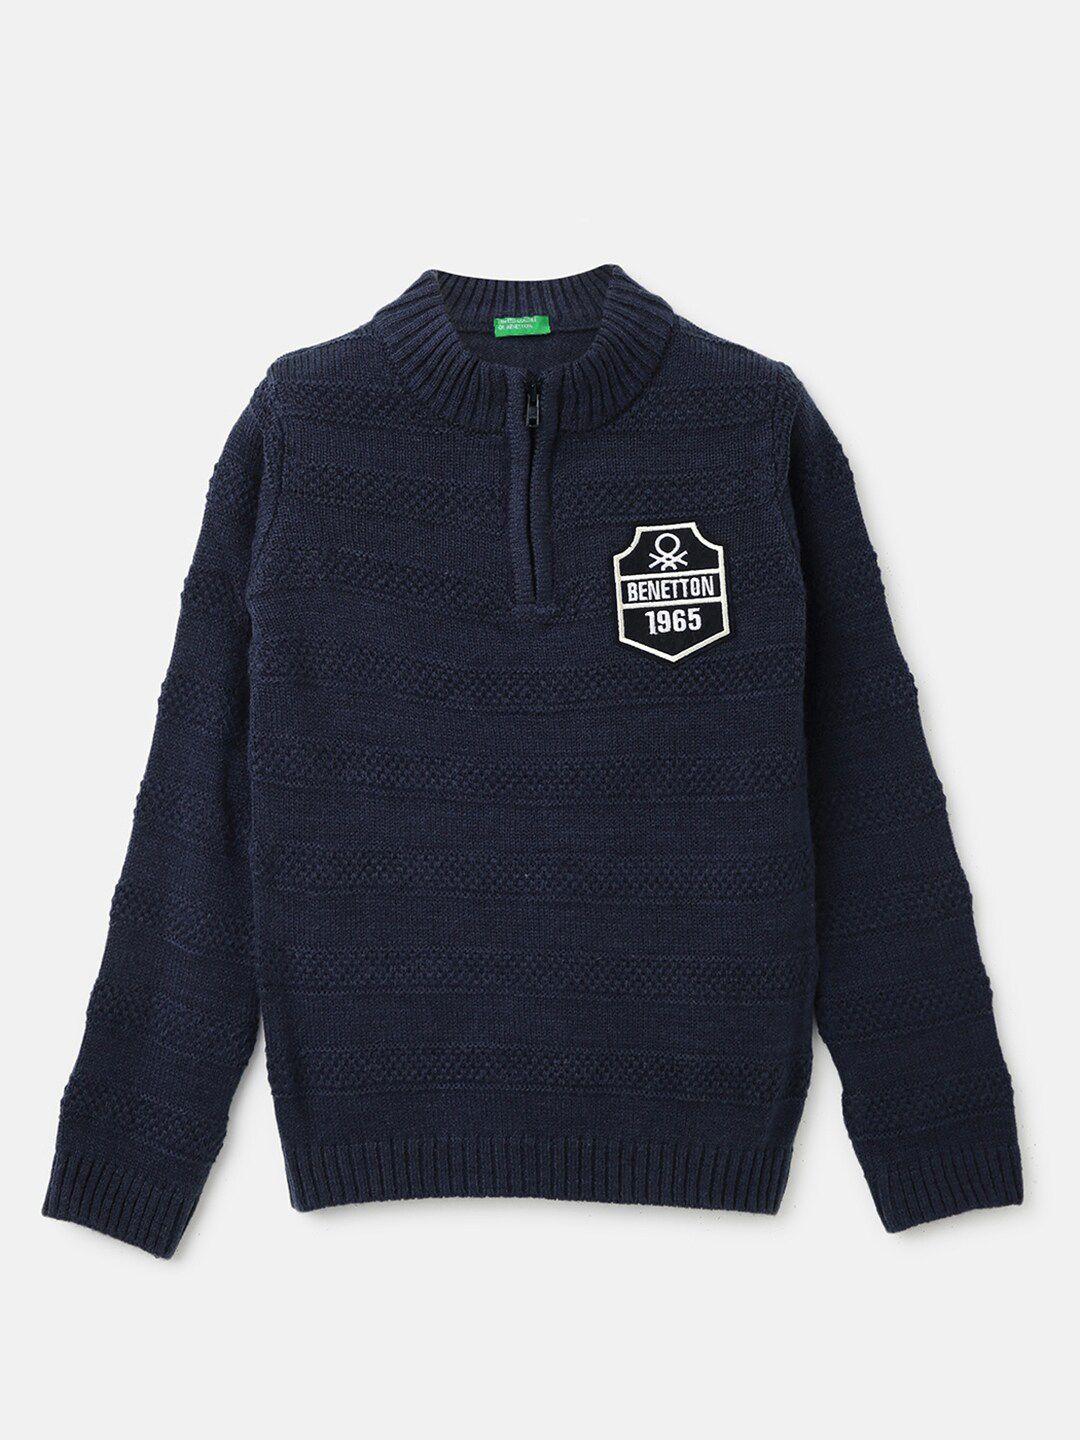 united colors of benetton boys mock collar cable knit pullover cotton sweater